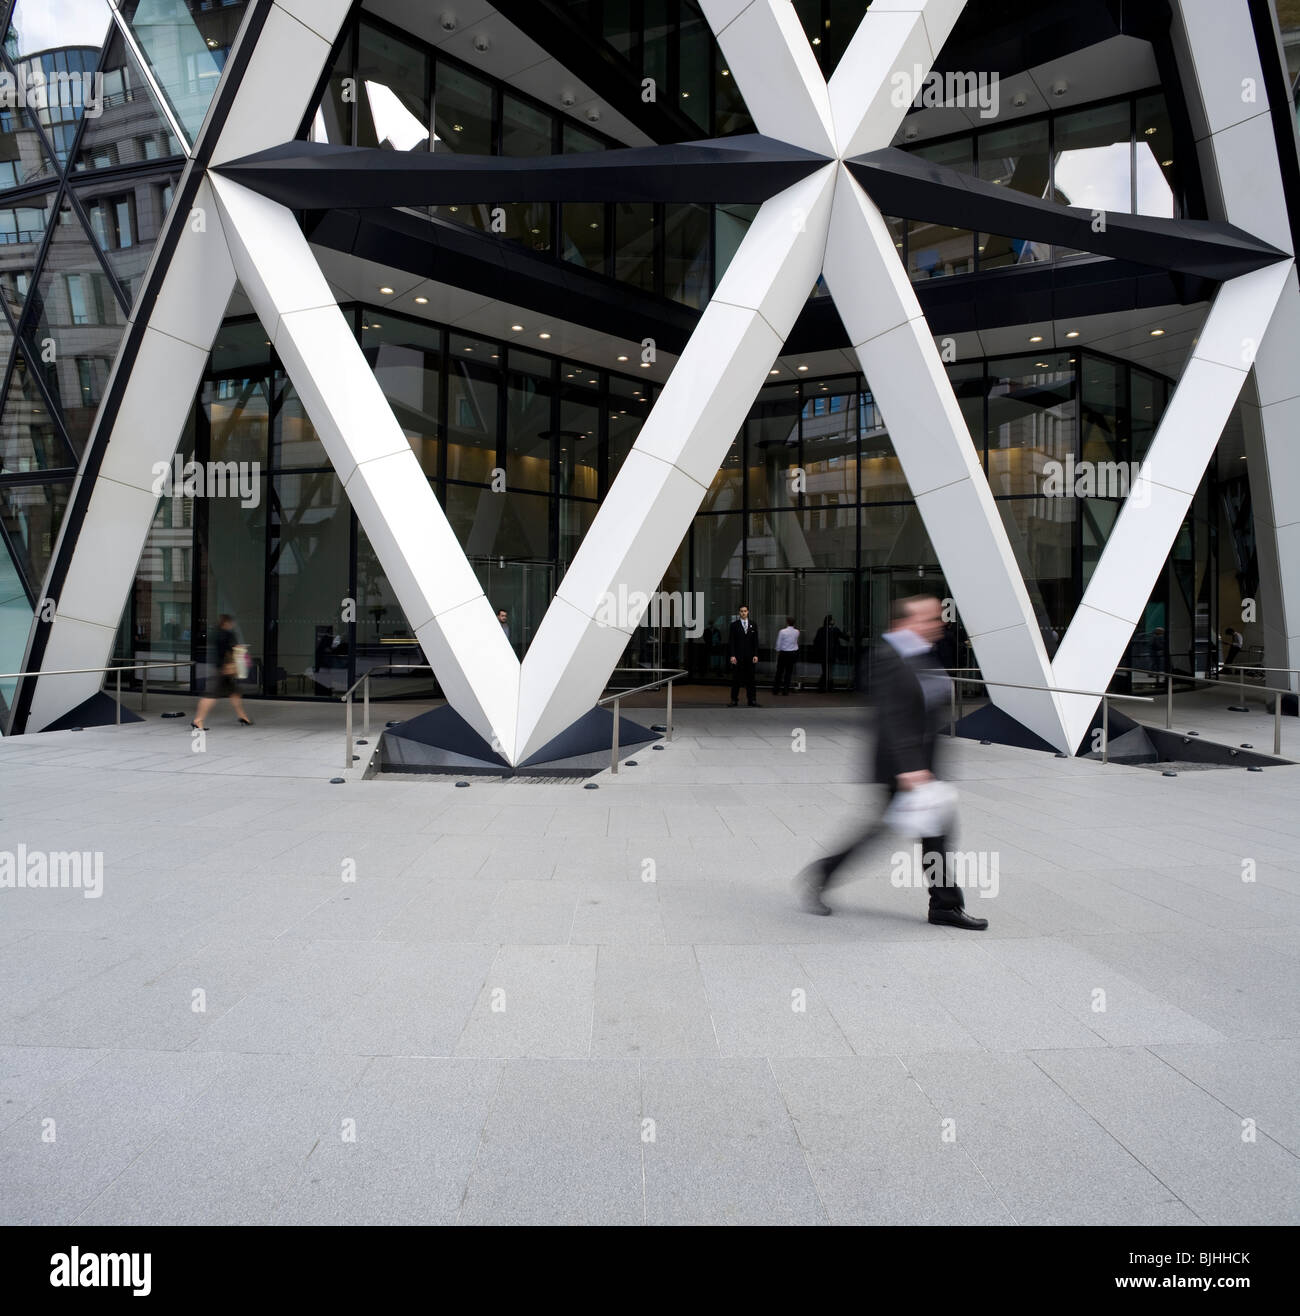 View of the Gherkin's main entrance and piazza at 30 St Mary Axe, showing the strong, white diagrid structured aperture. Stock Photo